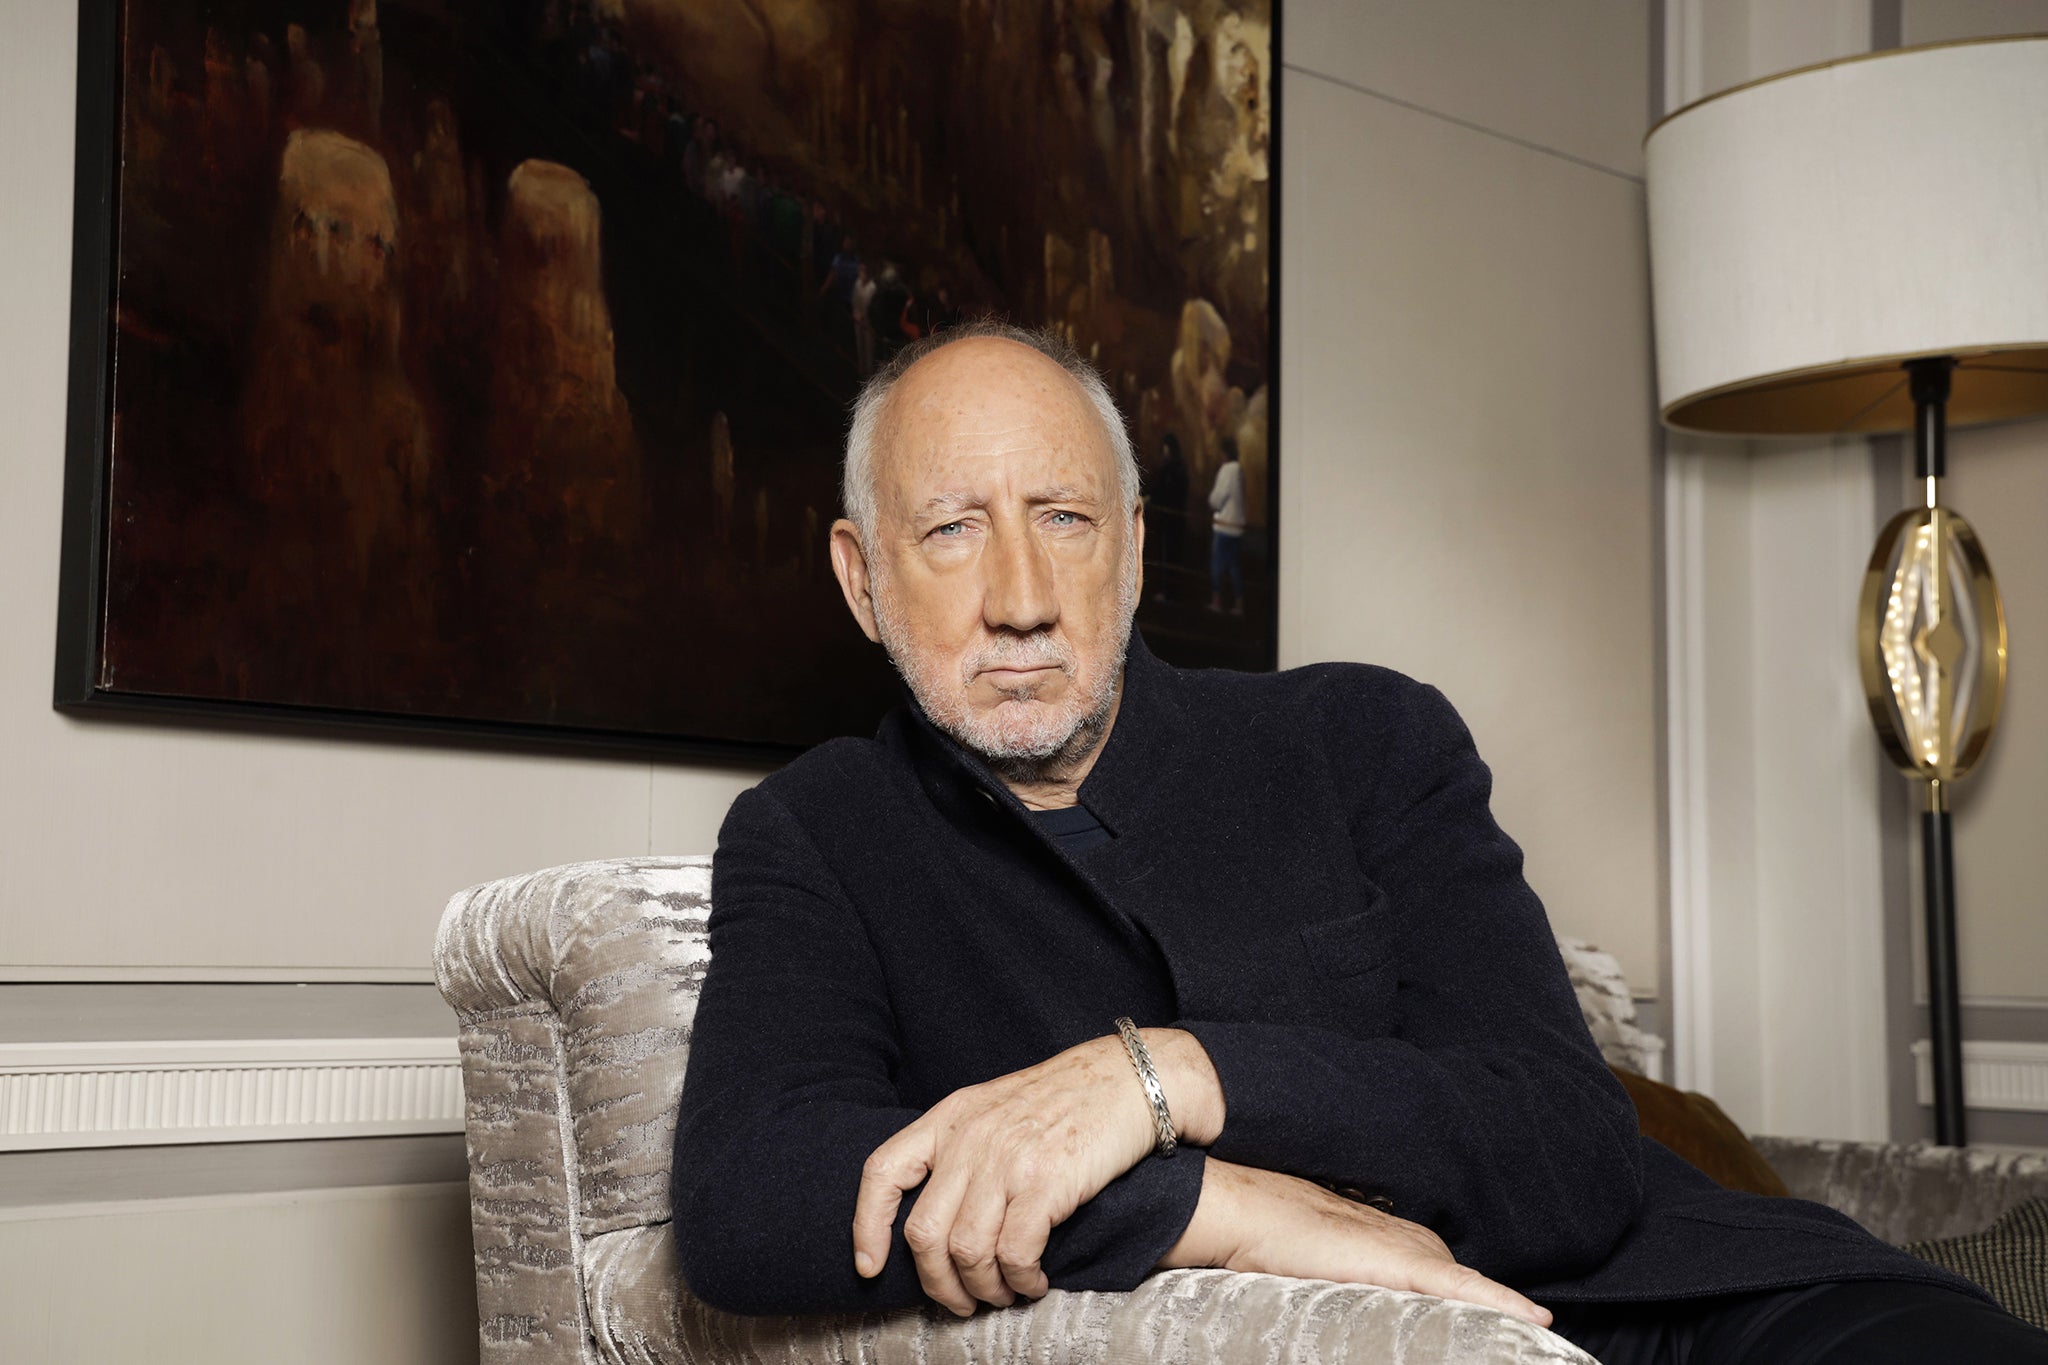 Pete Townshend: ‘I was terrified of going to court. I thought I would be used as a poster boy, so I refused. I took the caution’